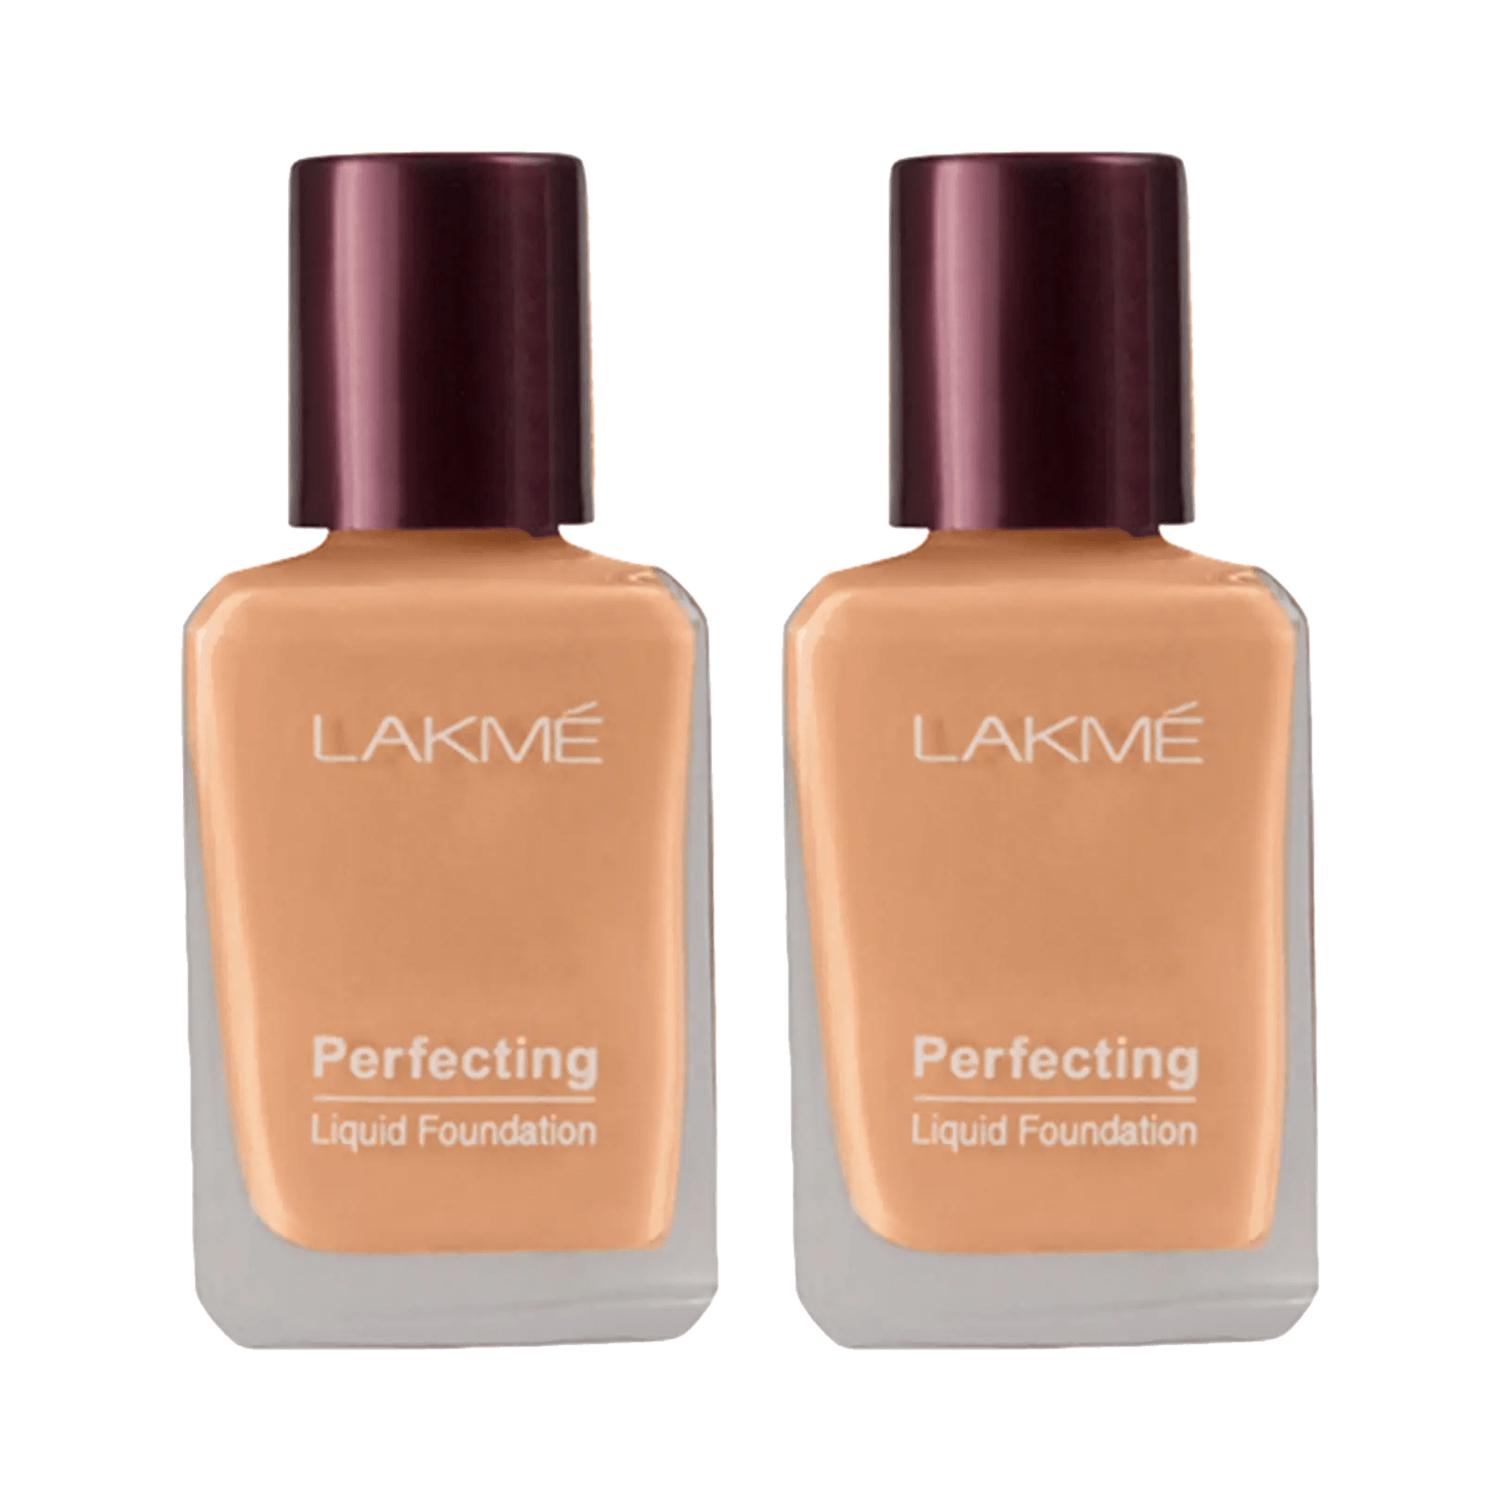 Lakme | Lakme Perfecting Liquid Foundation Natural Shell (27 ml) - (Pack of 2)